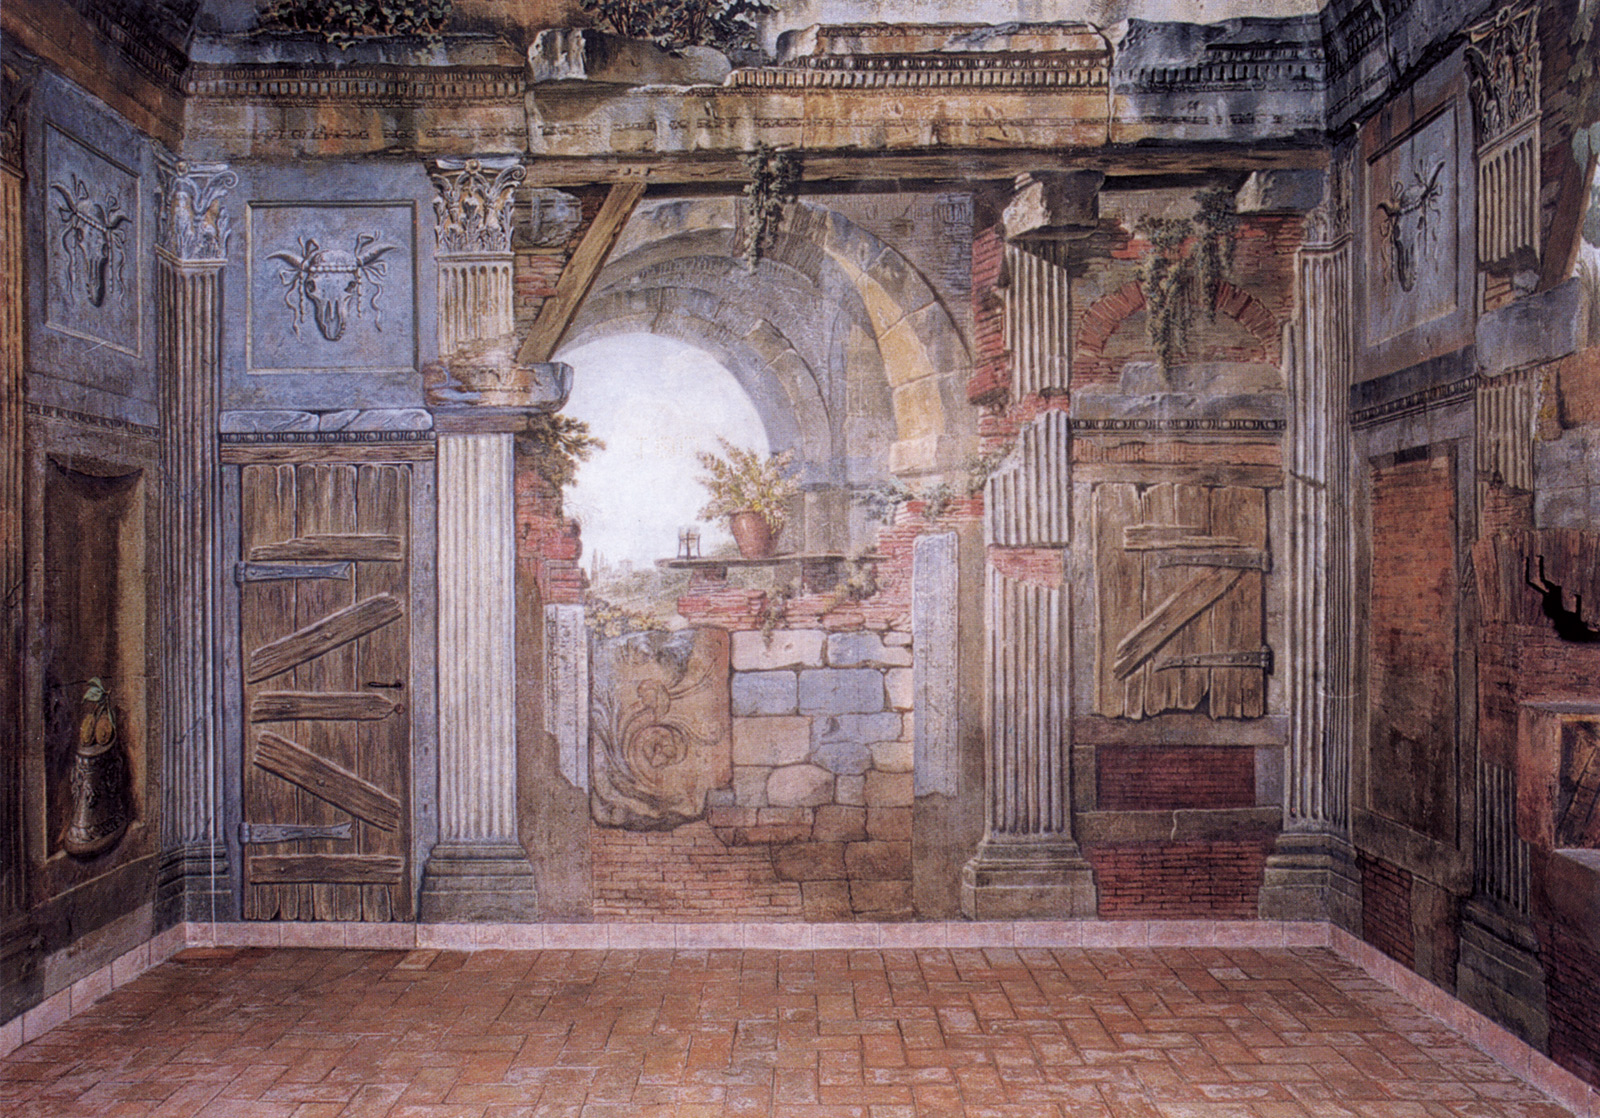 Two photographs of a cell at the Convent of Santa Clara at Santa Trinità dei Monti, Rome. The cell, with a trompe-l’oeil interior that represents a ruined temple, was painted in the seventeen sixties by the French artist Charles-Louis Clérisseau. The second image from circa two thousand shows the same wall after a recent restoration in which the modern door was again replaced by a boarded-up panel. The room’s furniture, which includes a desk, table and chairs that Clérriseau designed to resembled crumbling fragments, has been lost. Christopher Woodward, in his book “In Ruins,” writes that “for a very long time this room was known only by the design drawings and it was assumed to have disappeared, but in the nineteen sixties it was discovered intact. … The room was made for Father LeSueur, a monk who was also a mathematician of distinction. One trompe-l’oeil book is lettered ’NEWTON’ on its spine. This was his bedroom and study and we can only speculate as to why he chose to live in ruins; was it, I wonder, a reminder that his scientific studies were only a particle of dust in God’s scheme?”